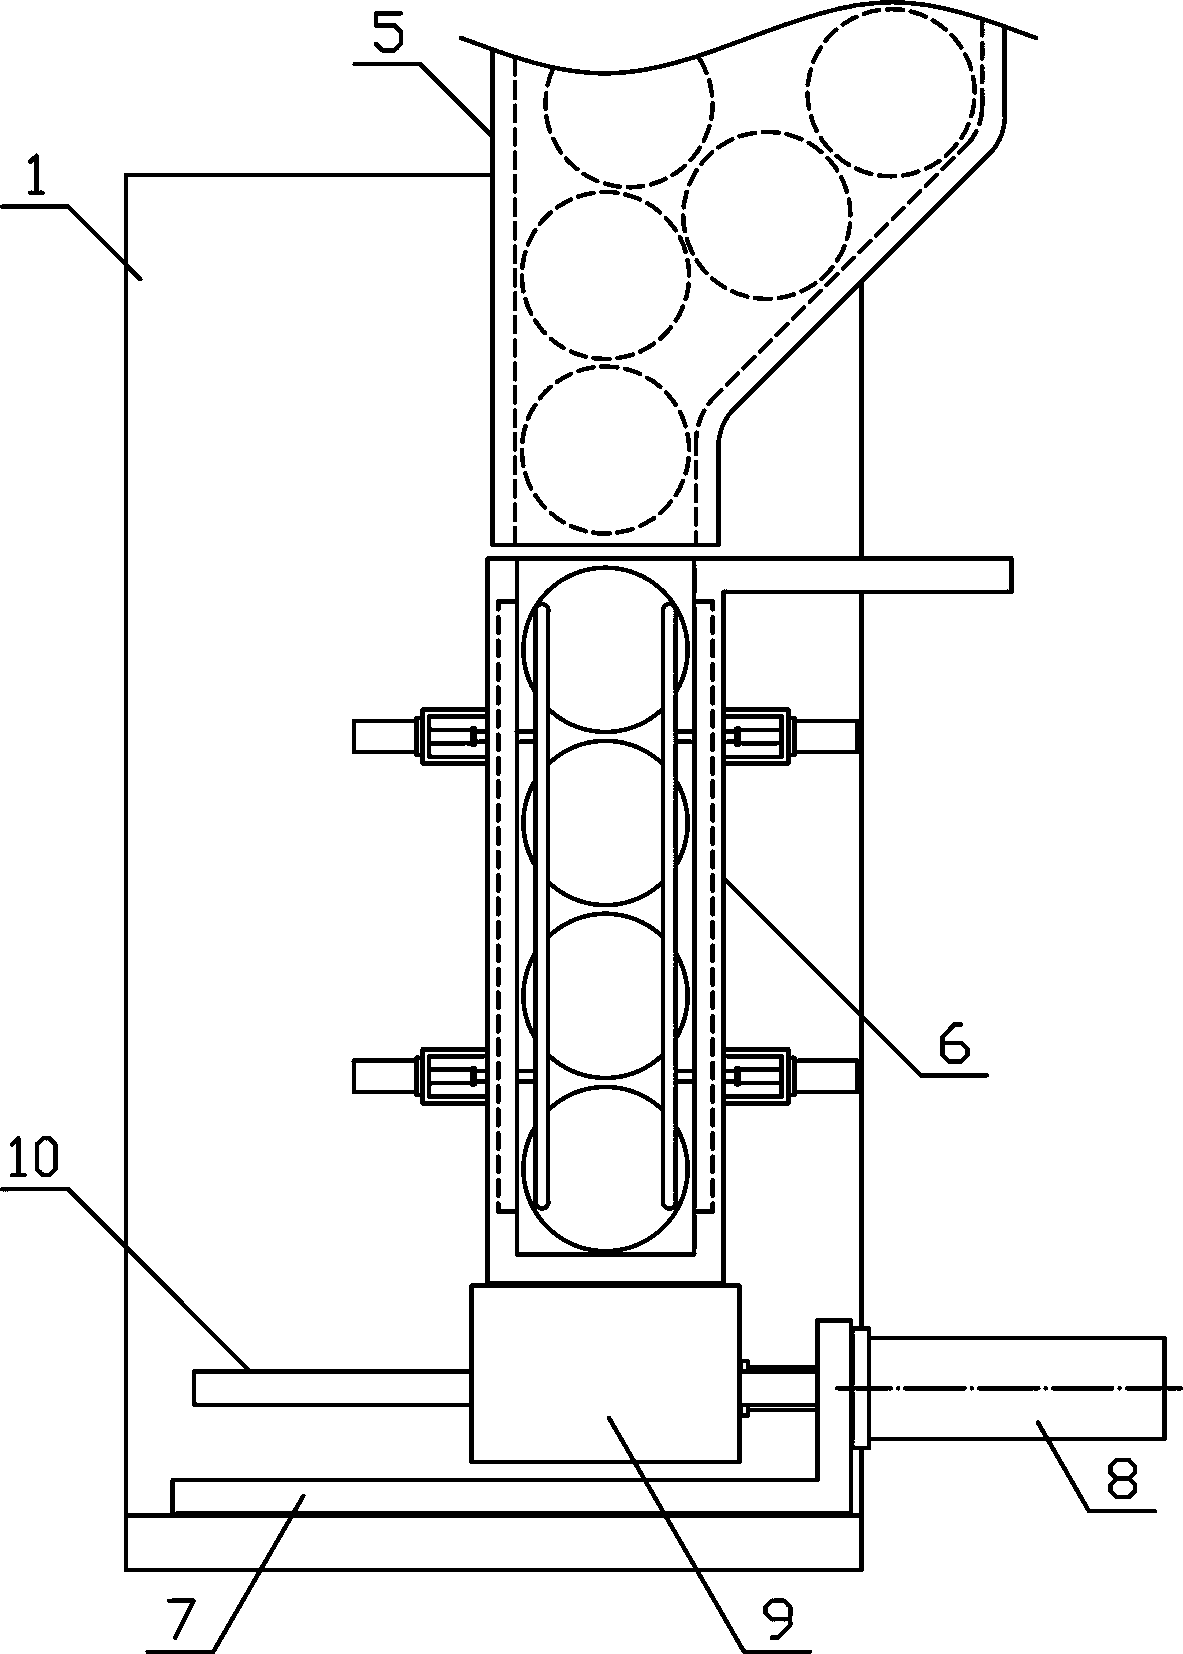 Mechanism for synchronously feeding multiple workpieces